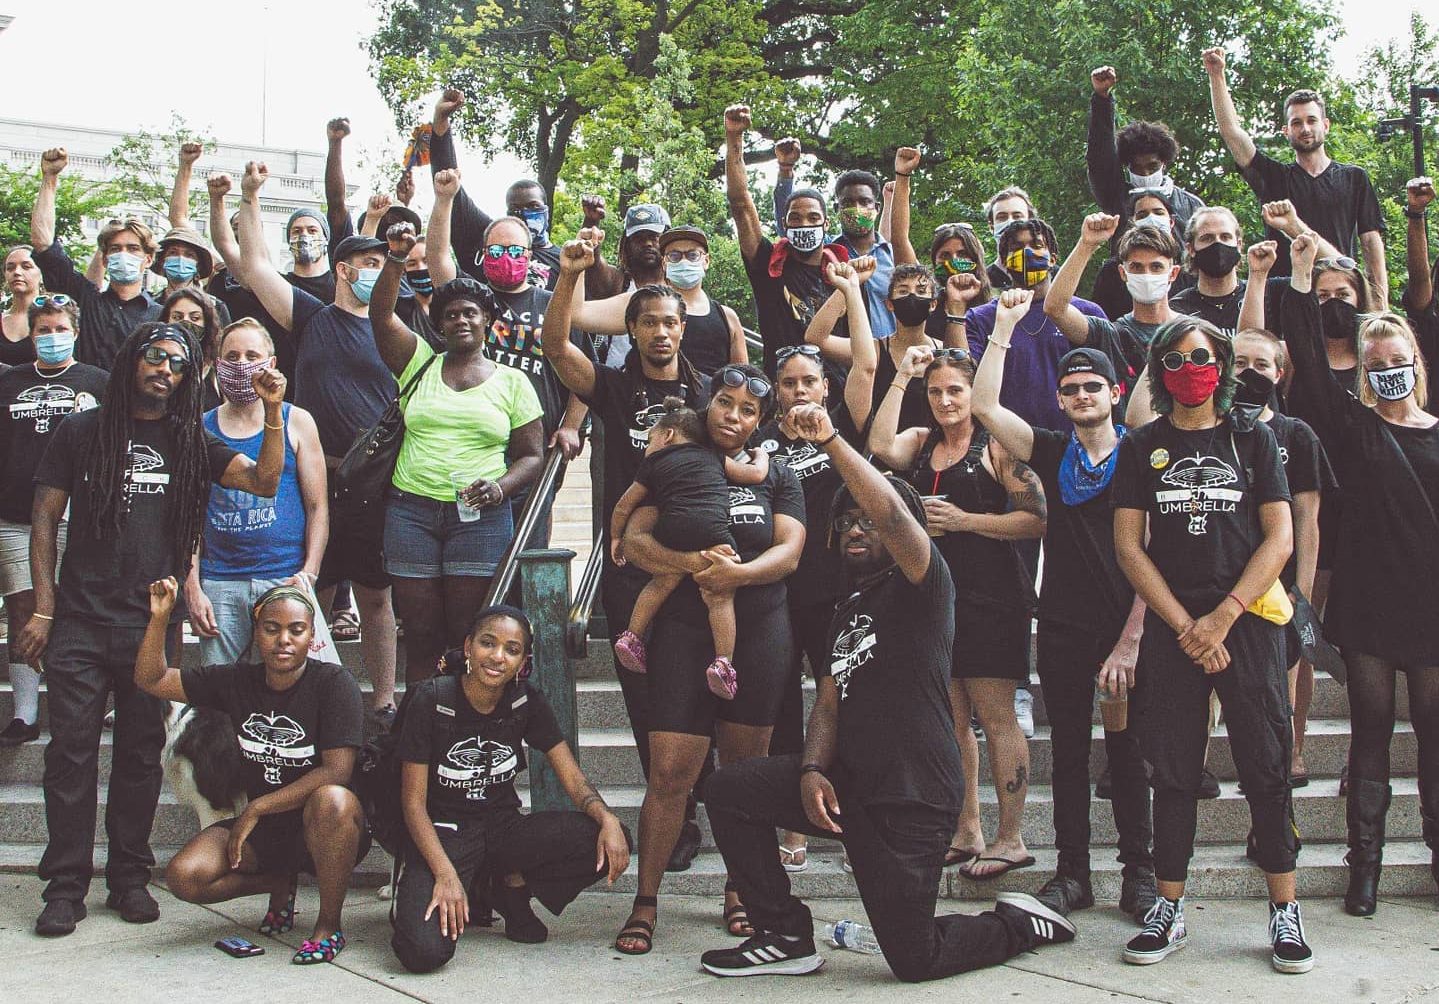 Now in its second year, Black Umbrella expands, keeps activism at its core